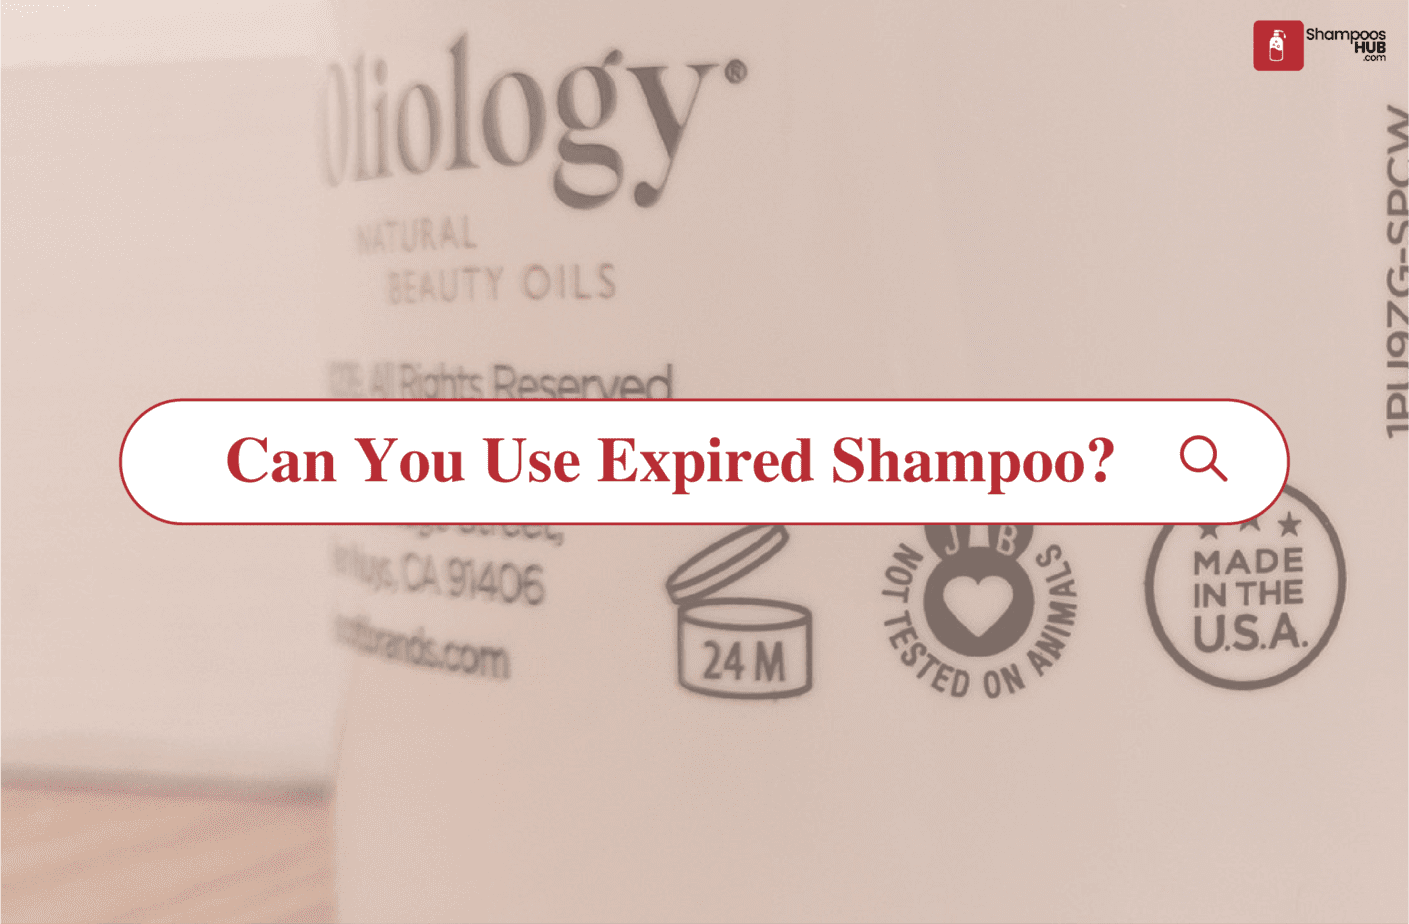 Can You Use Expired Shampoo?